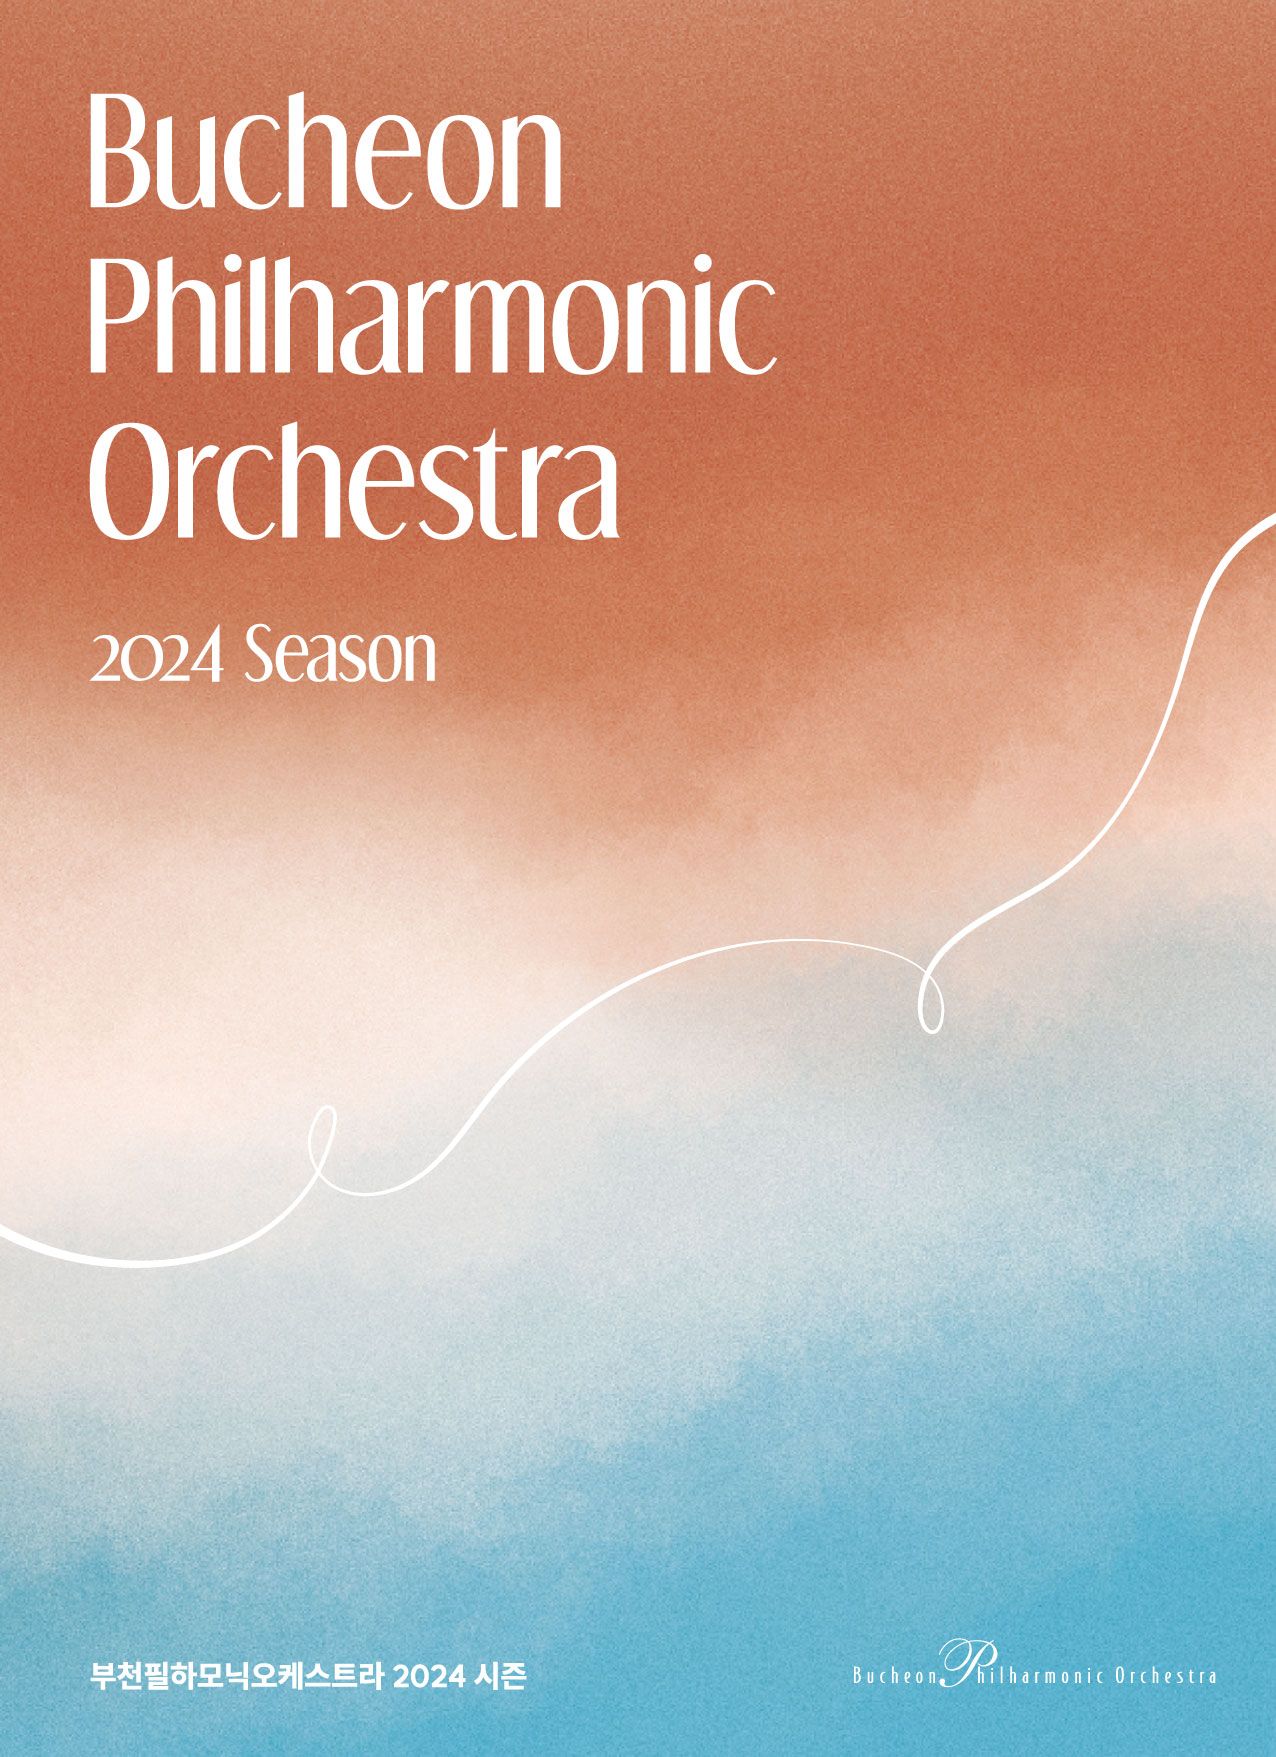 Bucheon Philharmonic Orchestra - Classical Morning 'A long time ago'